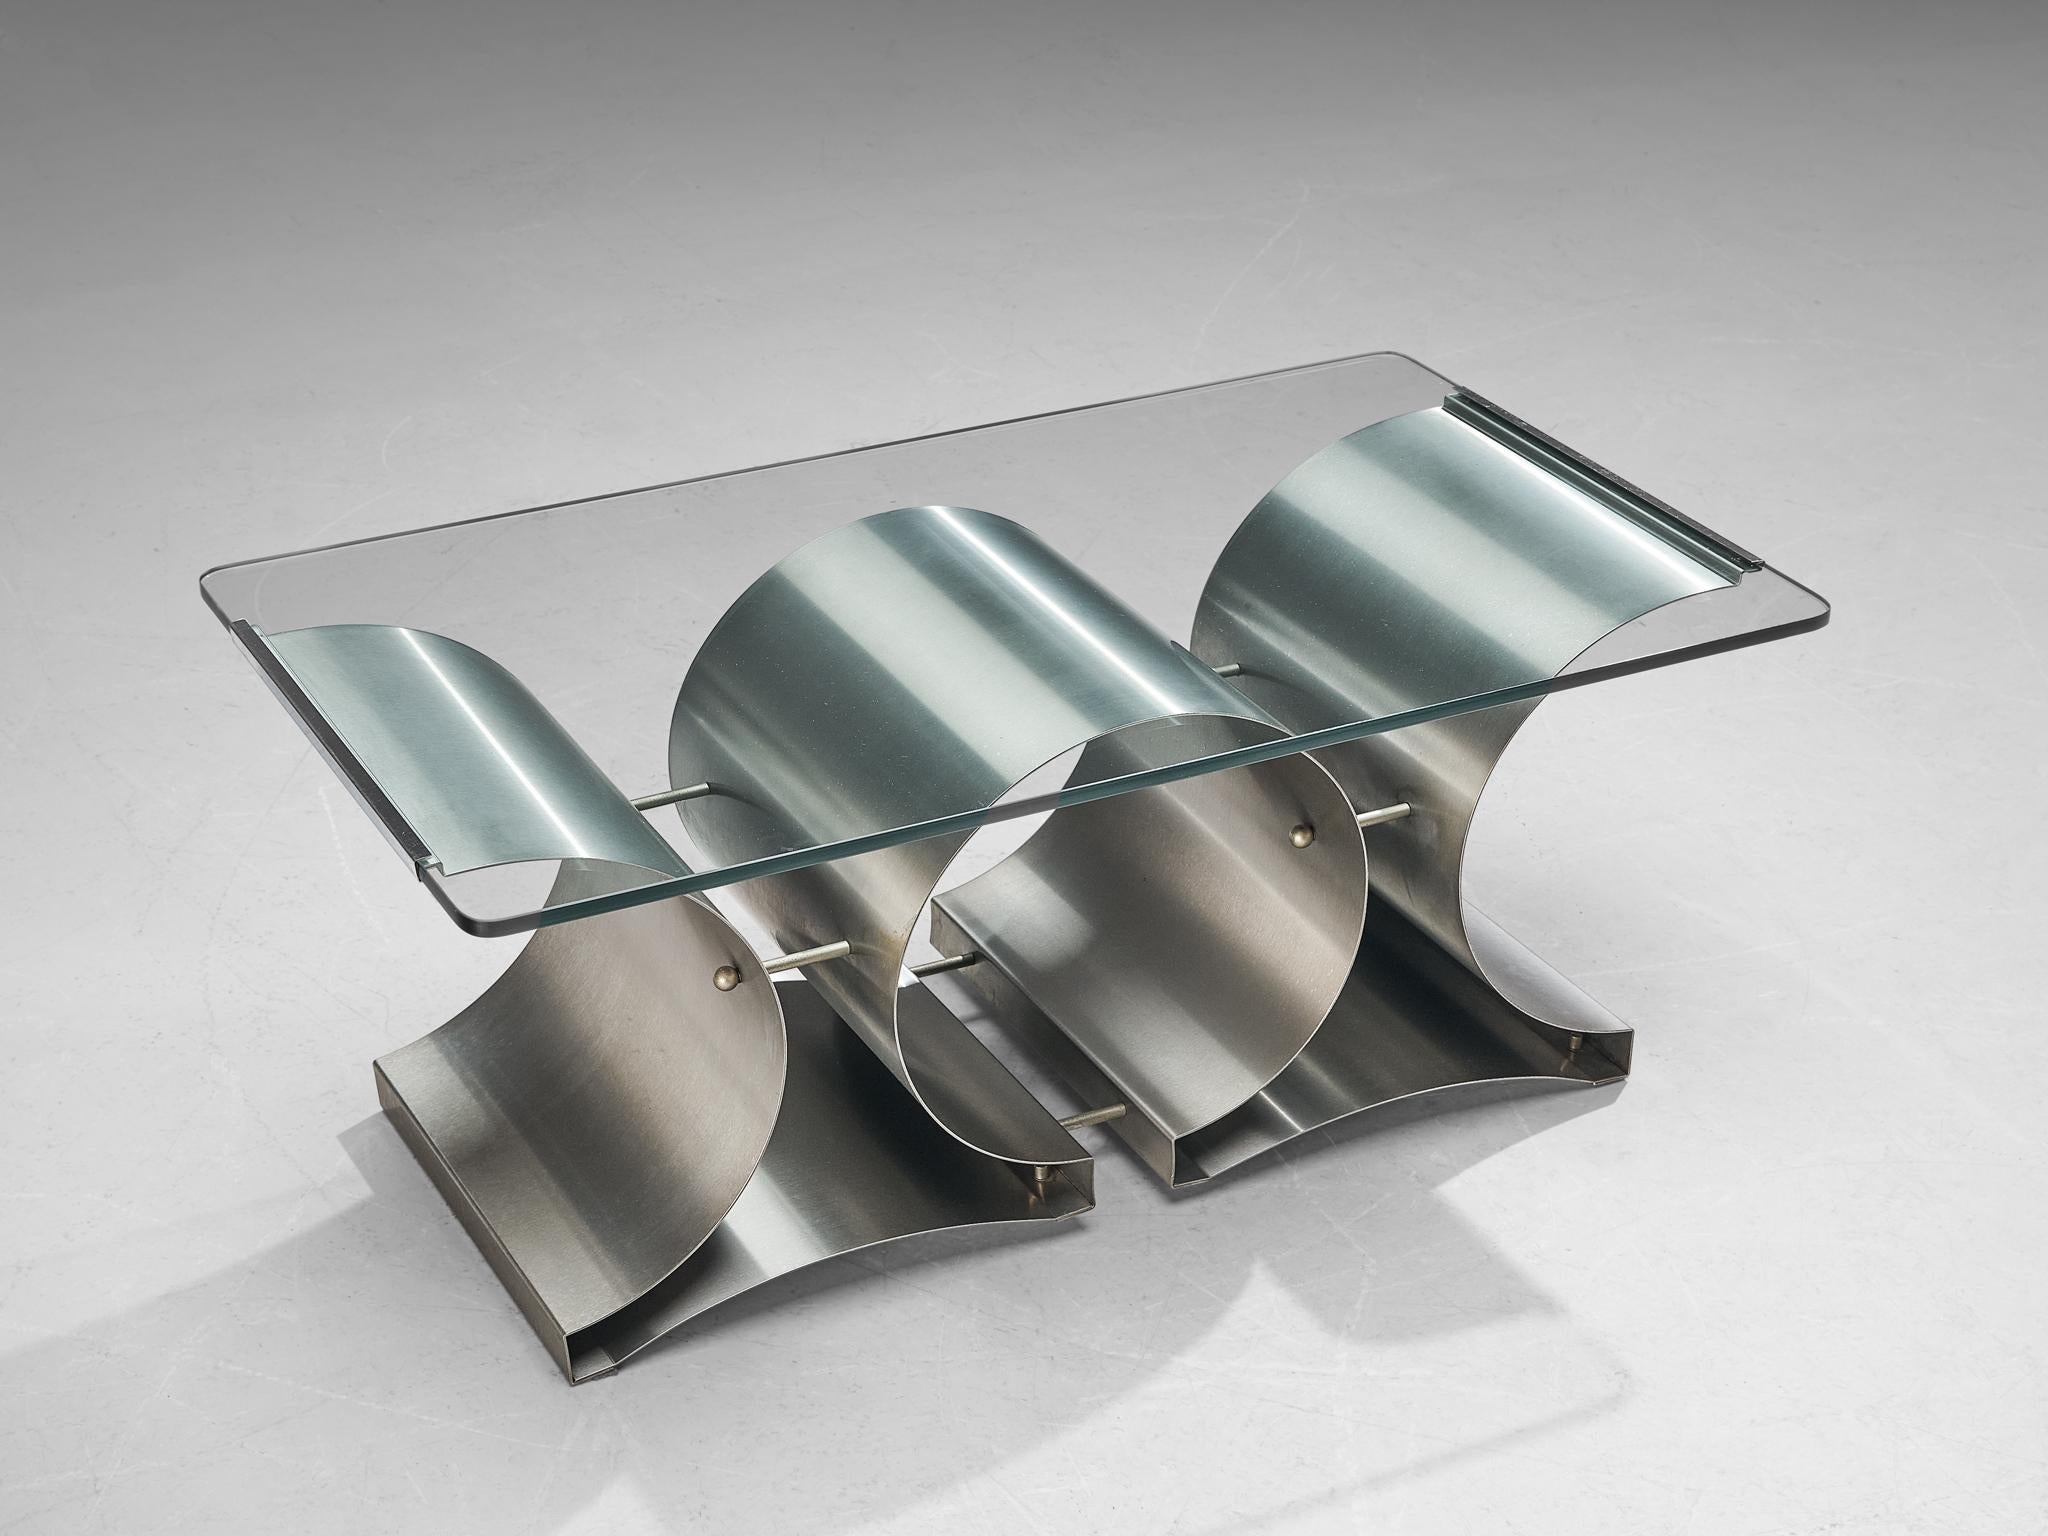 François Monnet coffee table, stainless steel, glass, France, 1970s

A chic X-base stainless steel coffee table by François Monnet, 1970s. The base of this coffee table is formed by two X shaped pieces of steel. They are pierced together with the